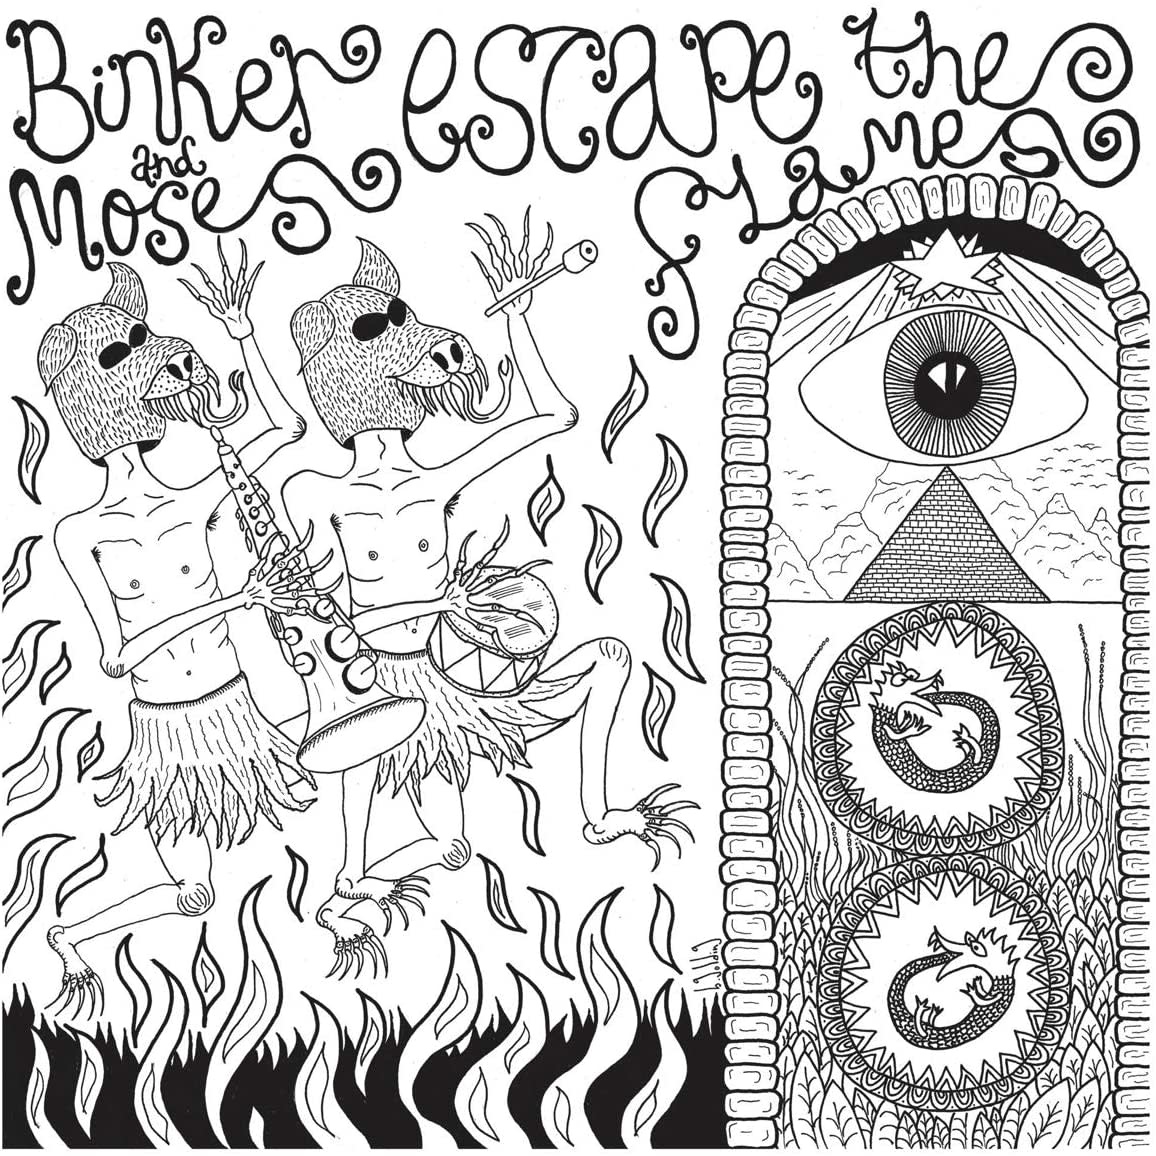 Binker And Moses ‎– Escape The Flames